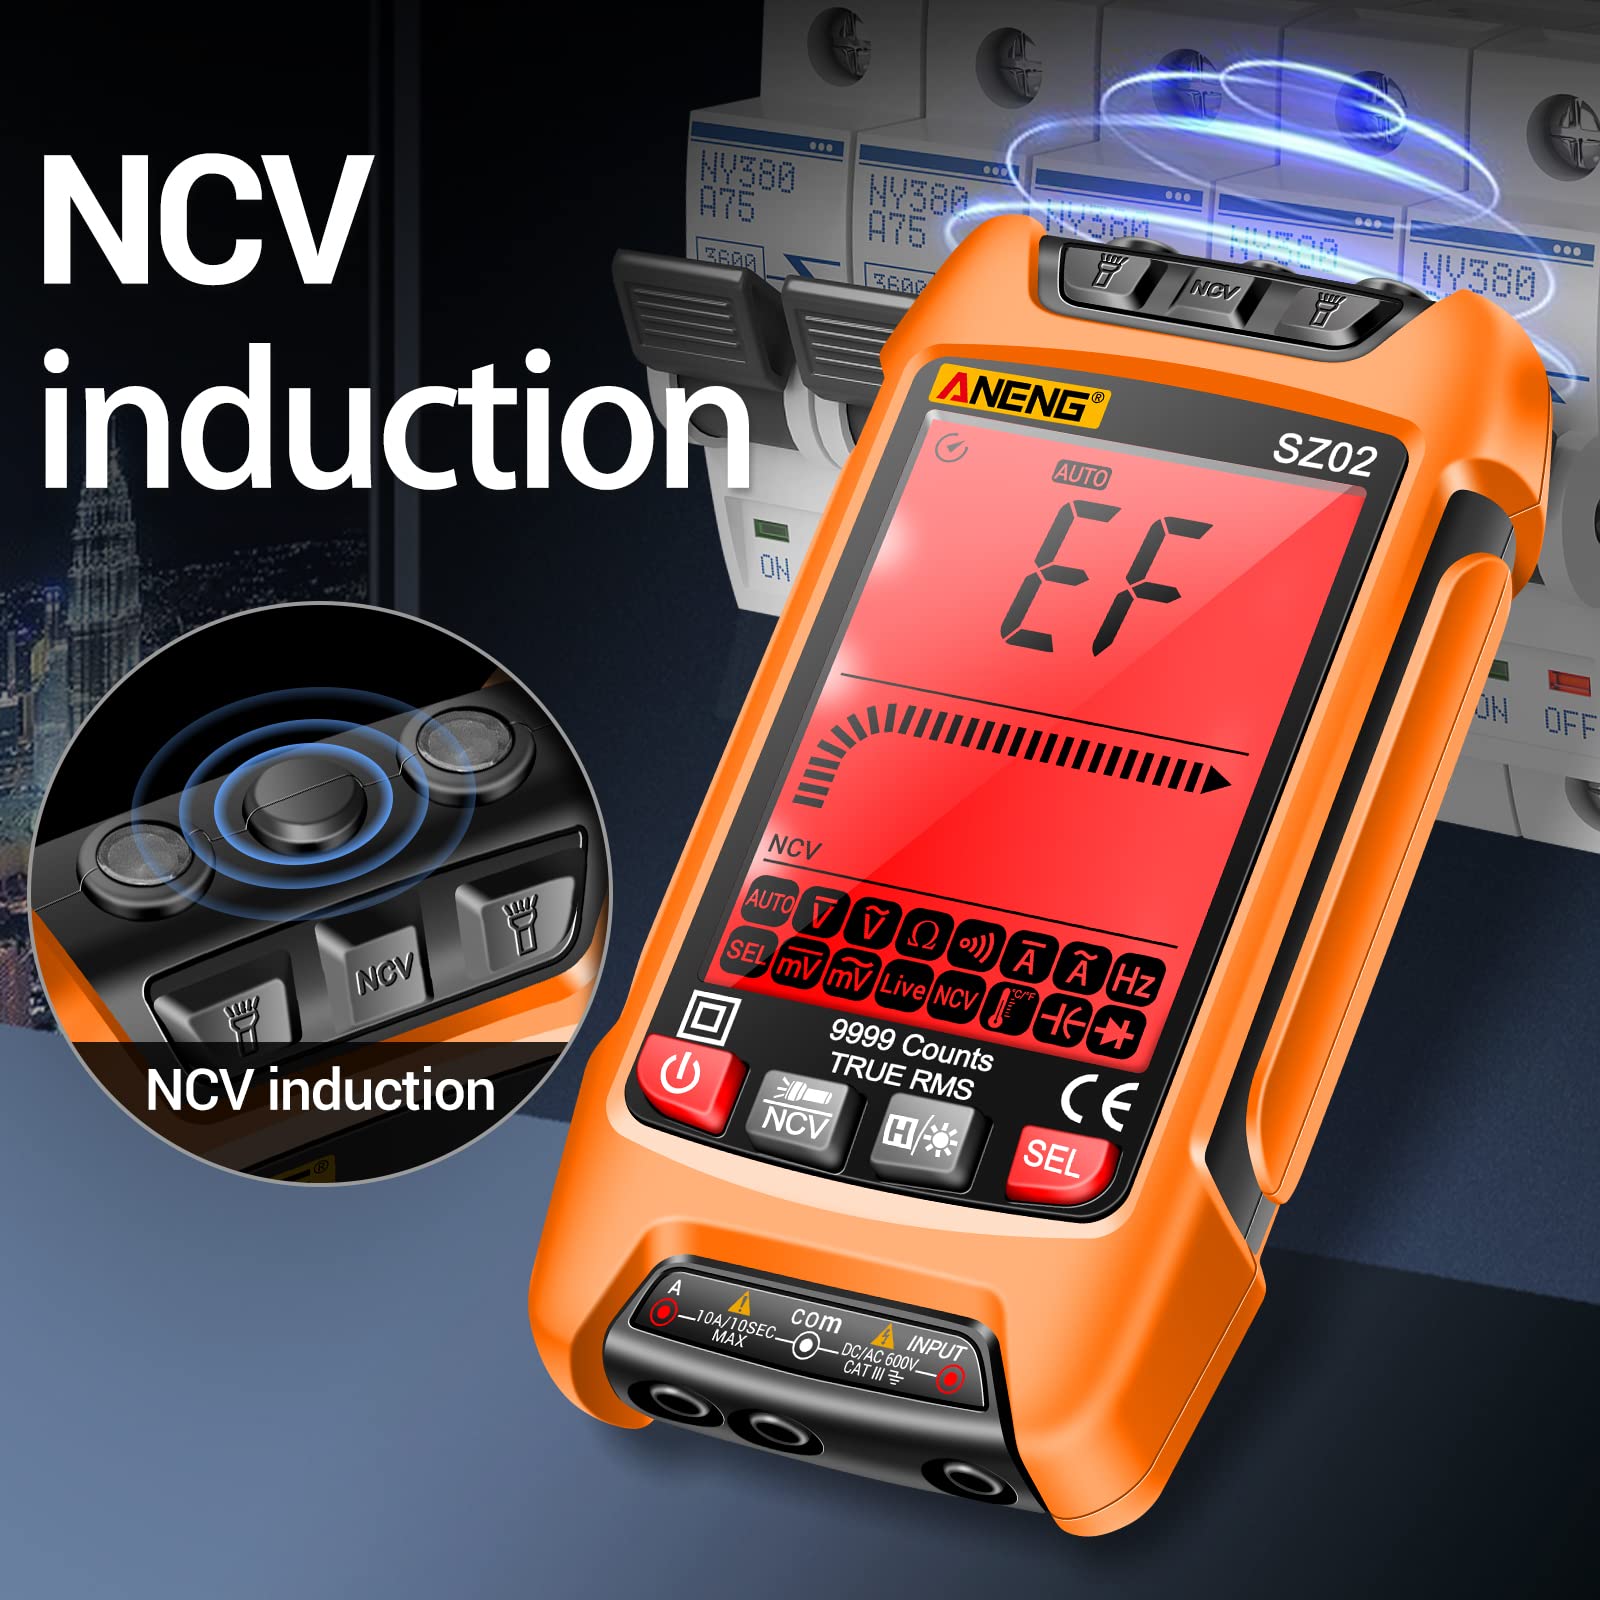 ANENG Digital Multimeter Smart Testers TRMS 9999 Counts Anti-Burning Ohm Amp Volt Meter Measures NCV,AC/DC Current/Voltage,Resistance,Continuity,Capacitance,diodes,Auto-ranging Electrical Tools